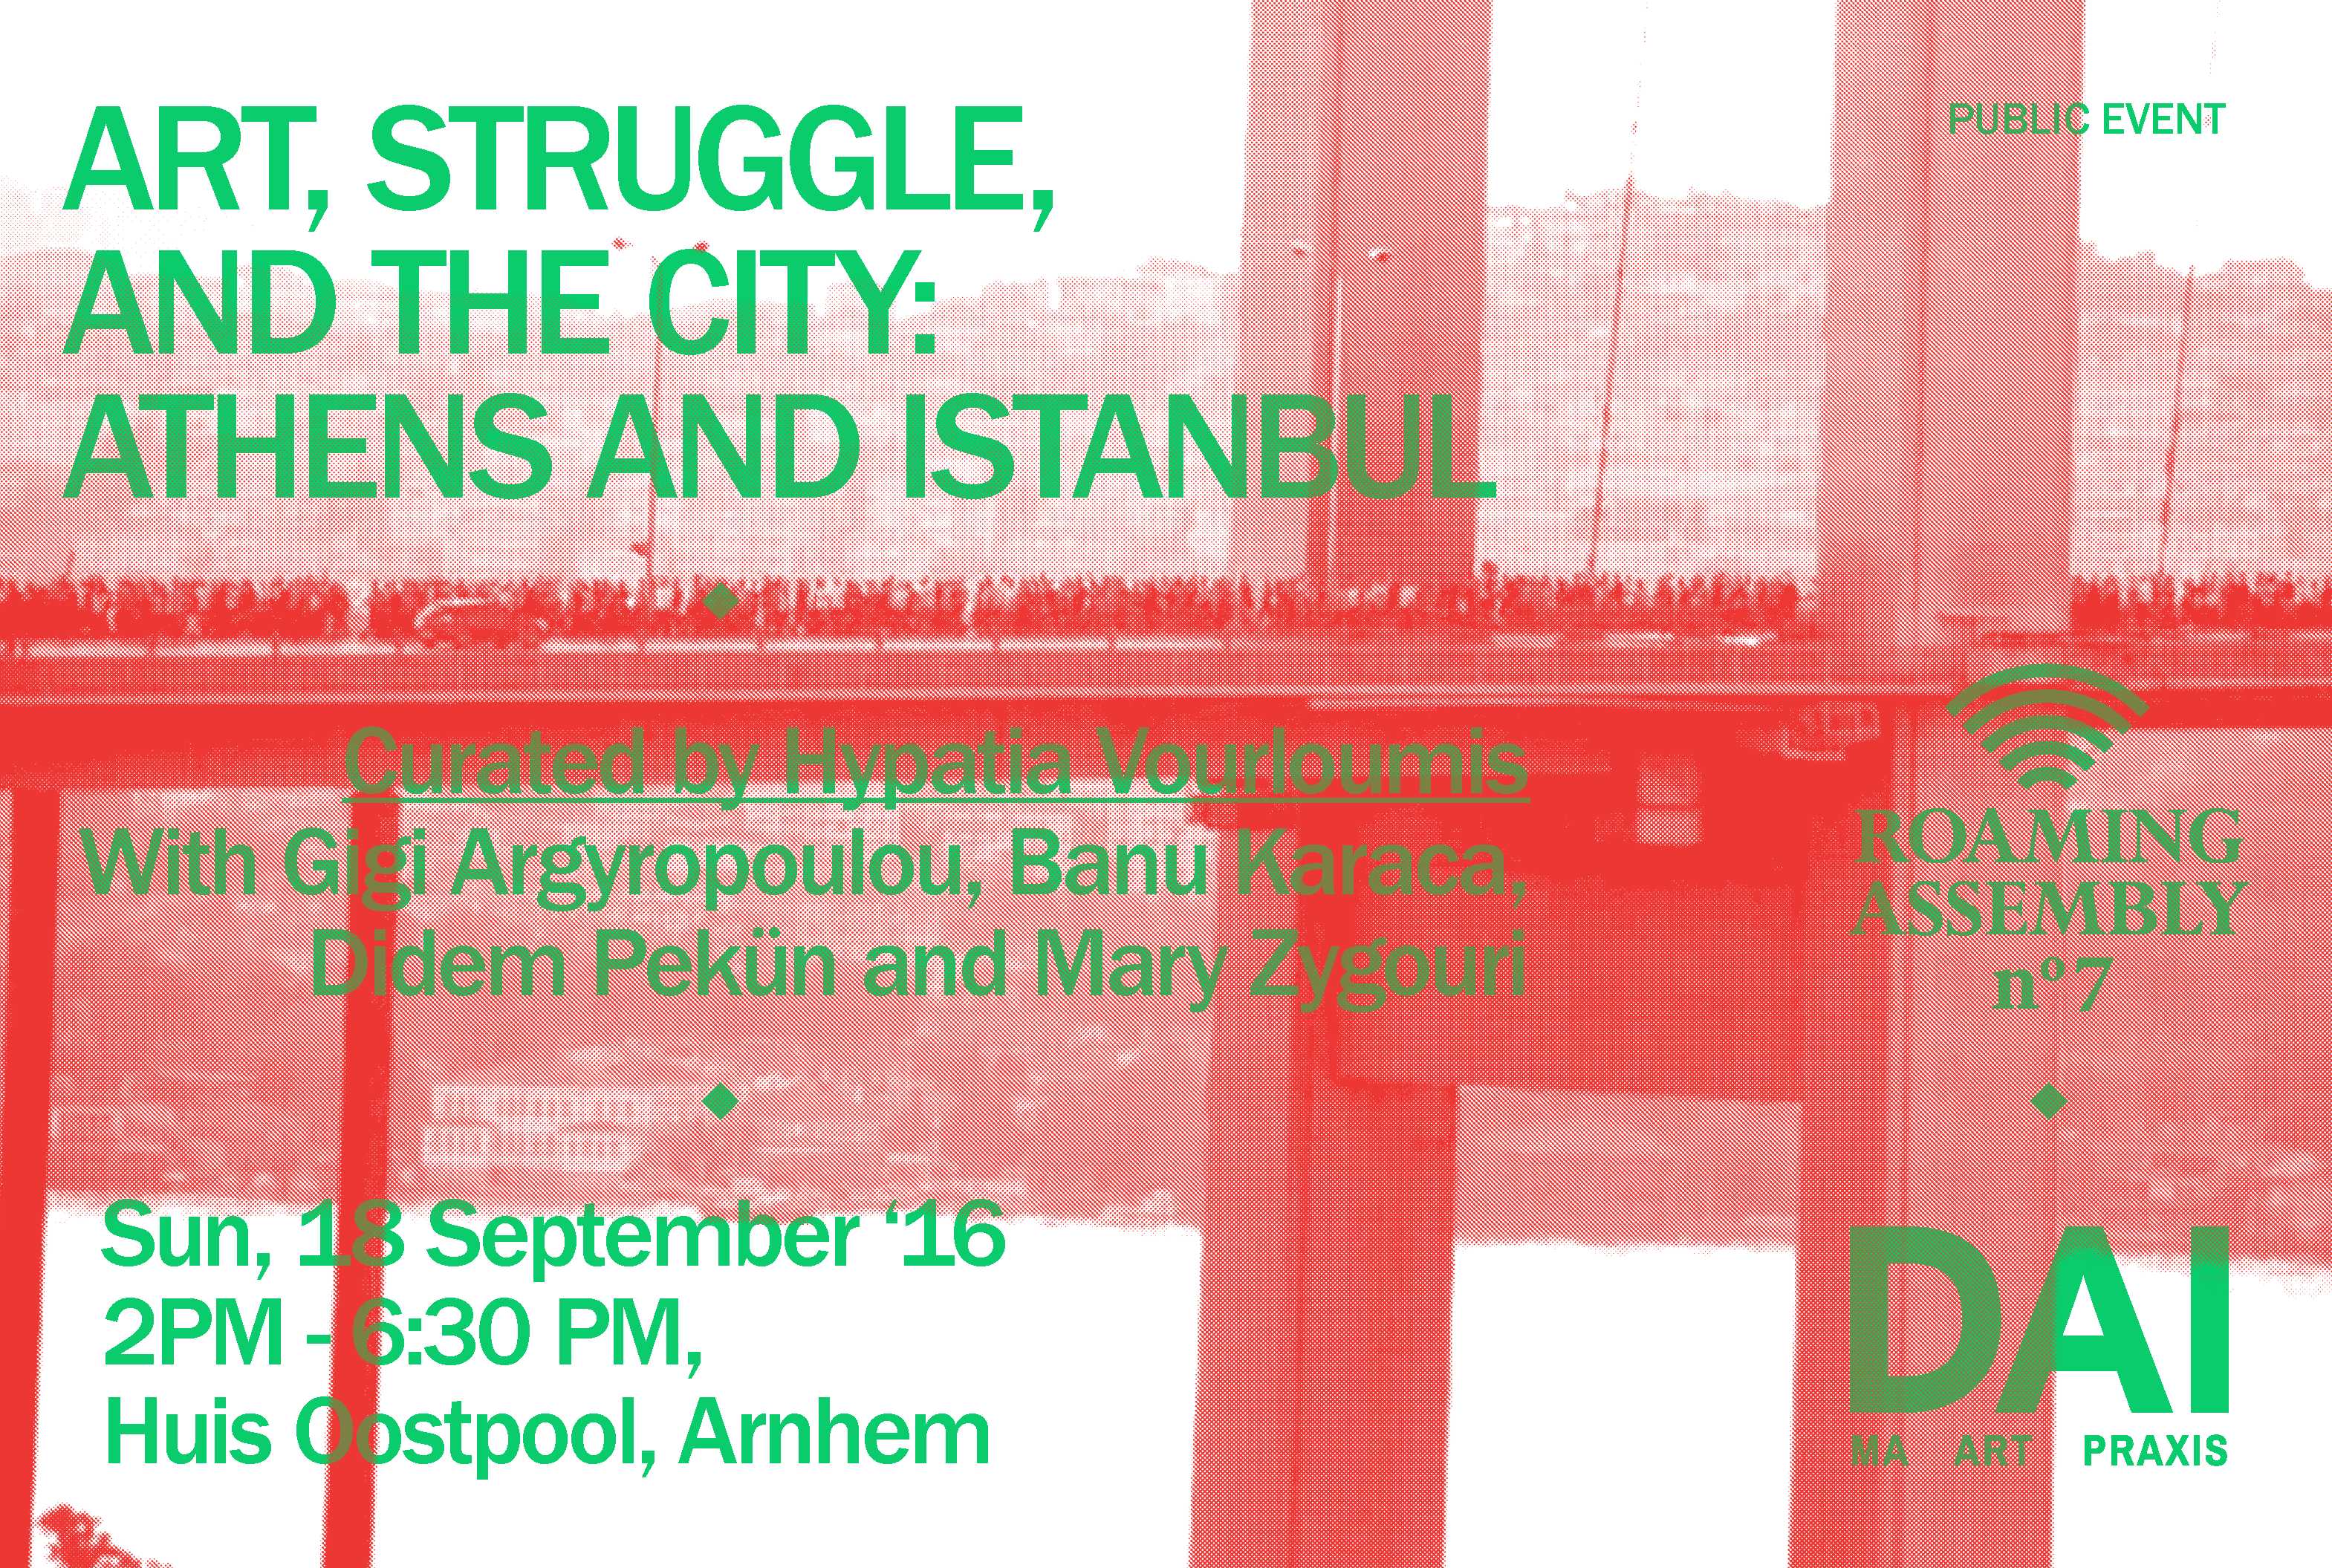 DAI, september 18 ~ Art, Struggle, and the City: Athens and Istanbul